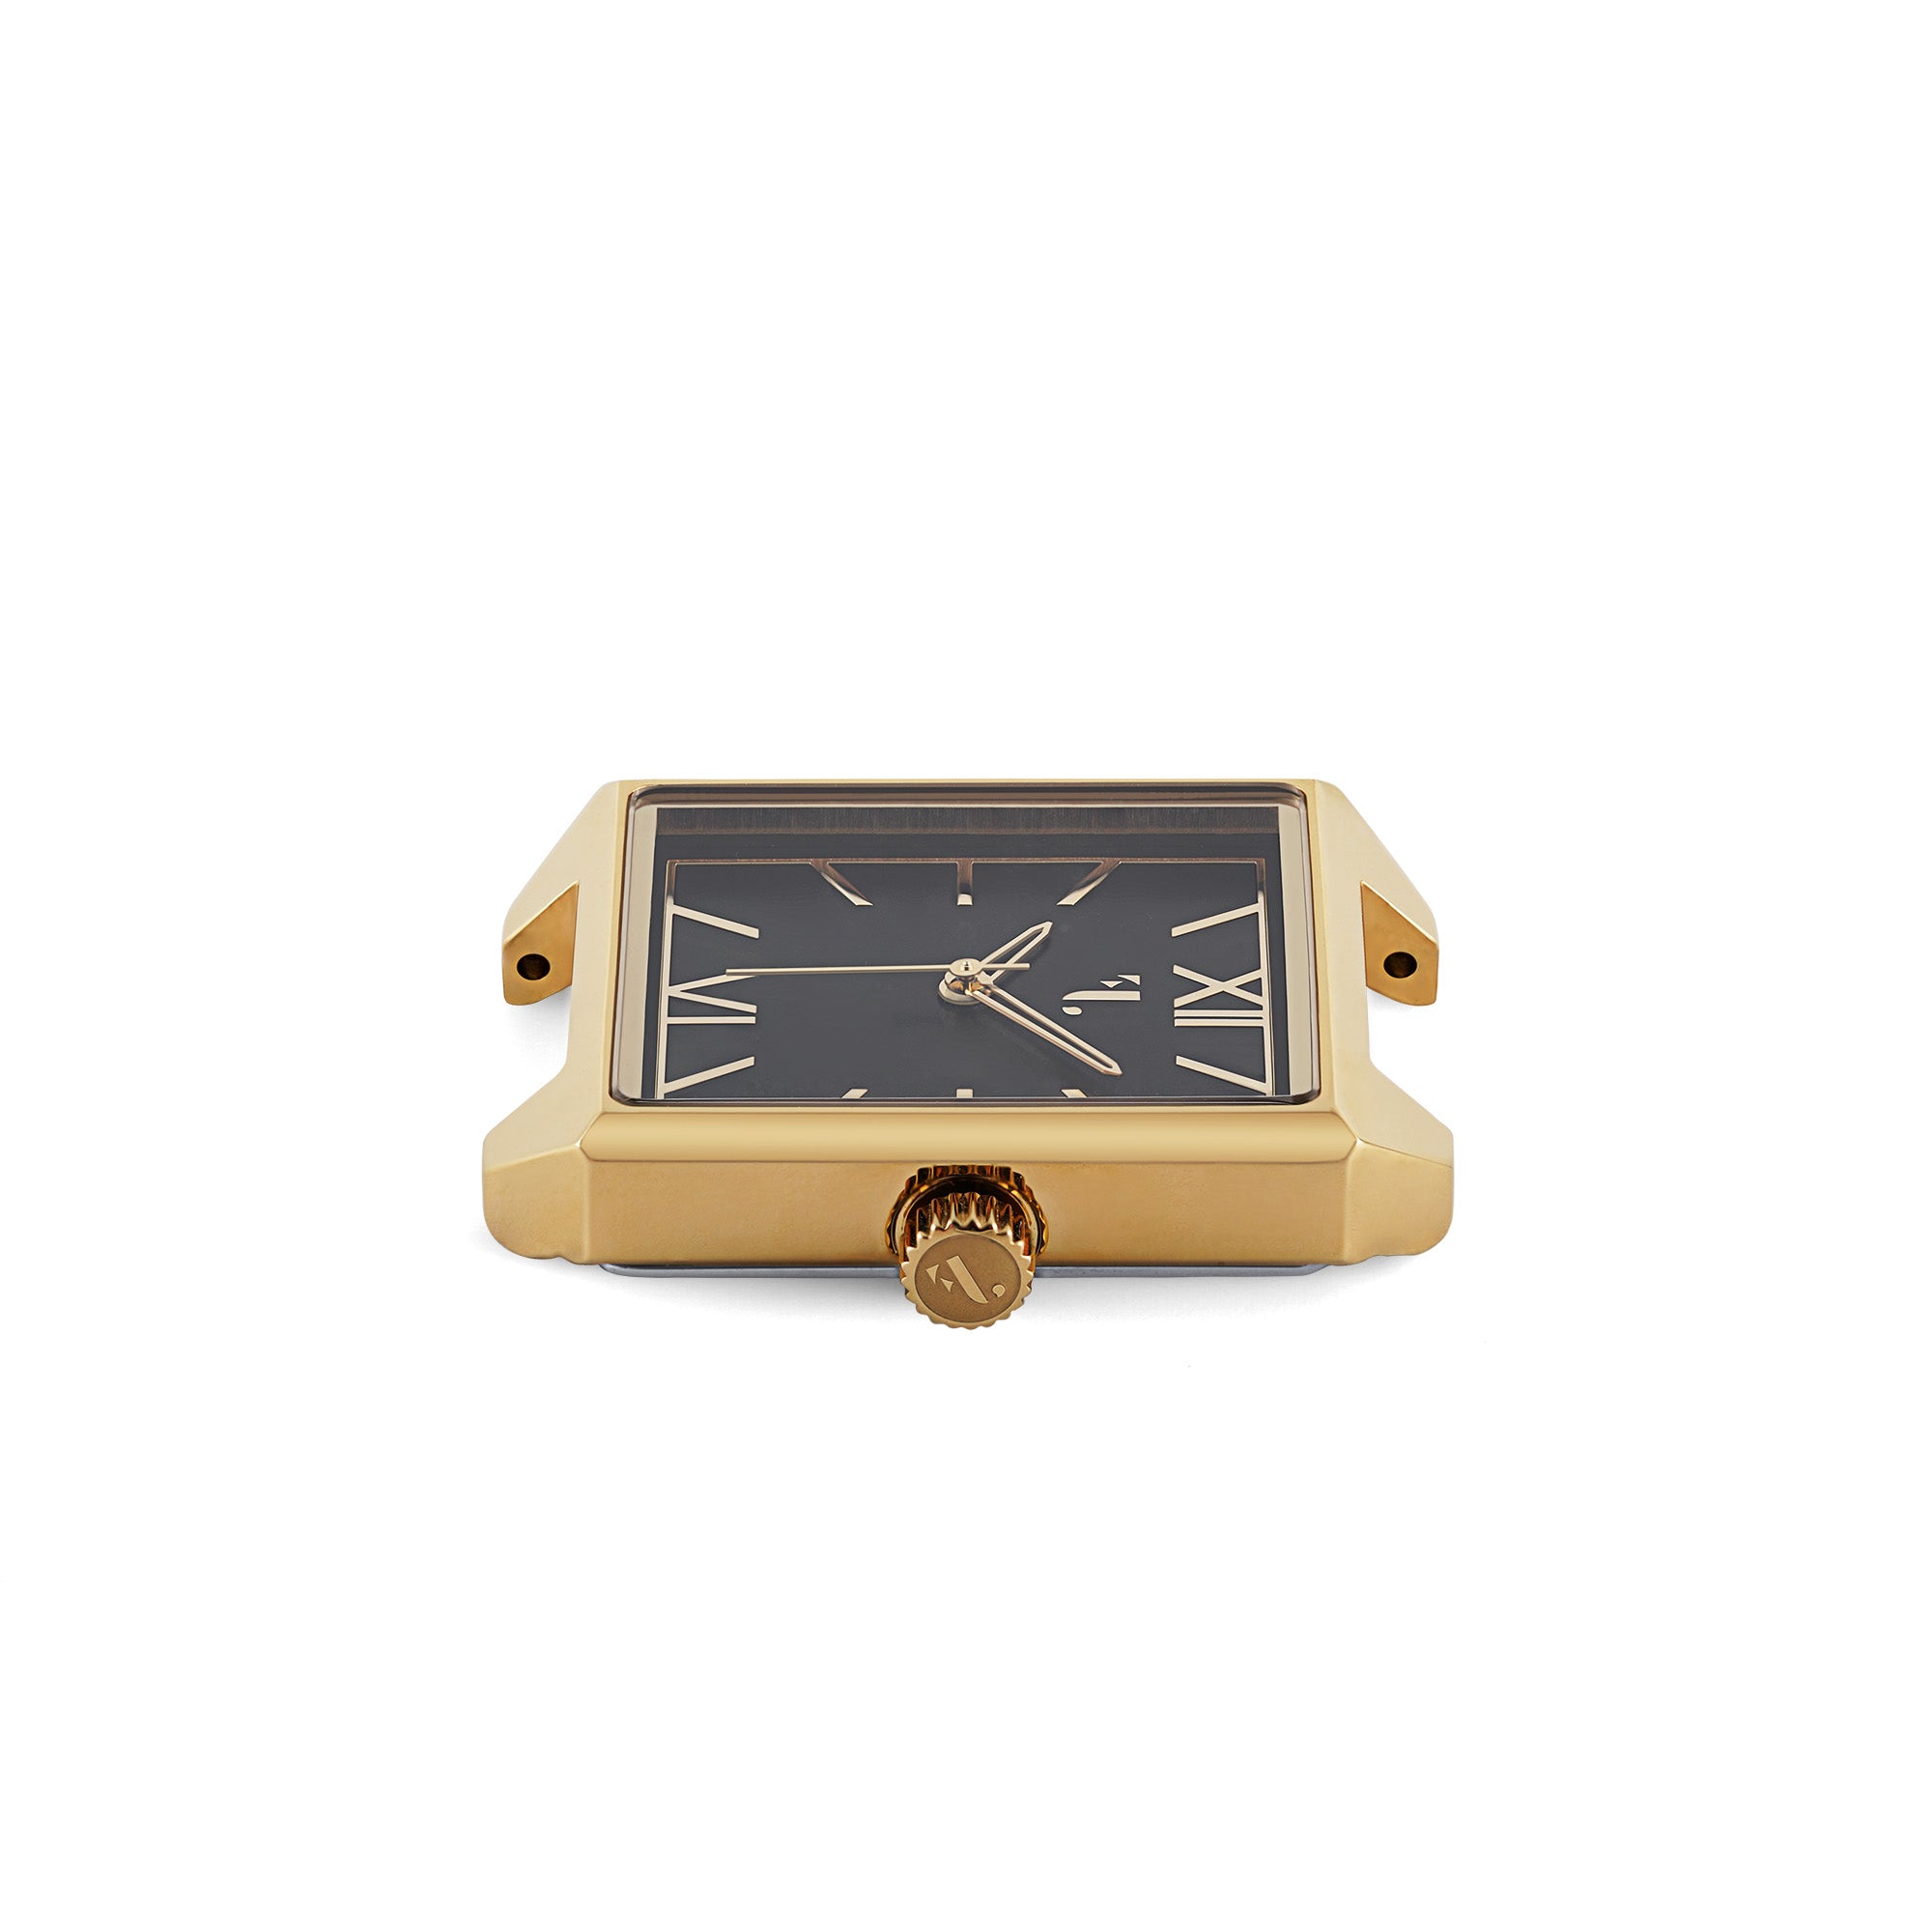 Brera watch. It is made of a square 14k gold case and a black dial. It is the ideal watch for a women, with its three hands, its quartz mechanism, its water resistance and its 2 year warranty.